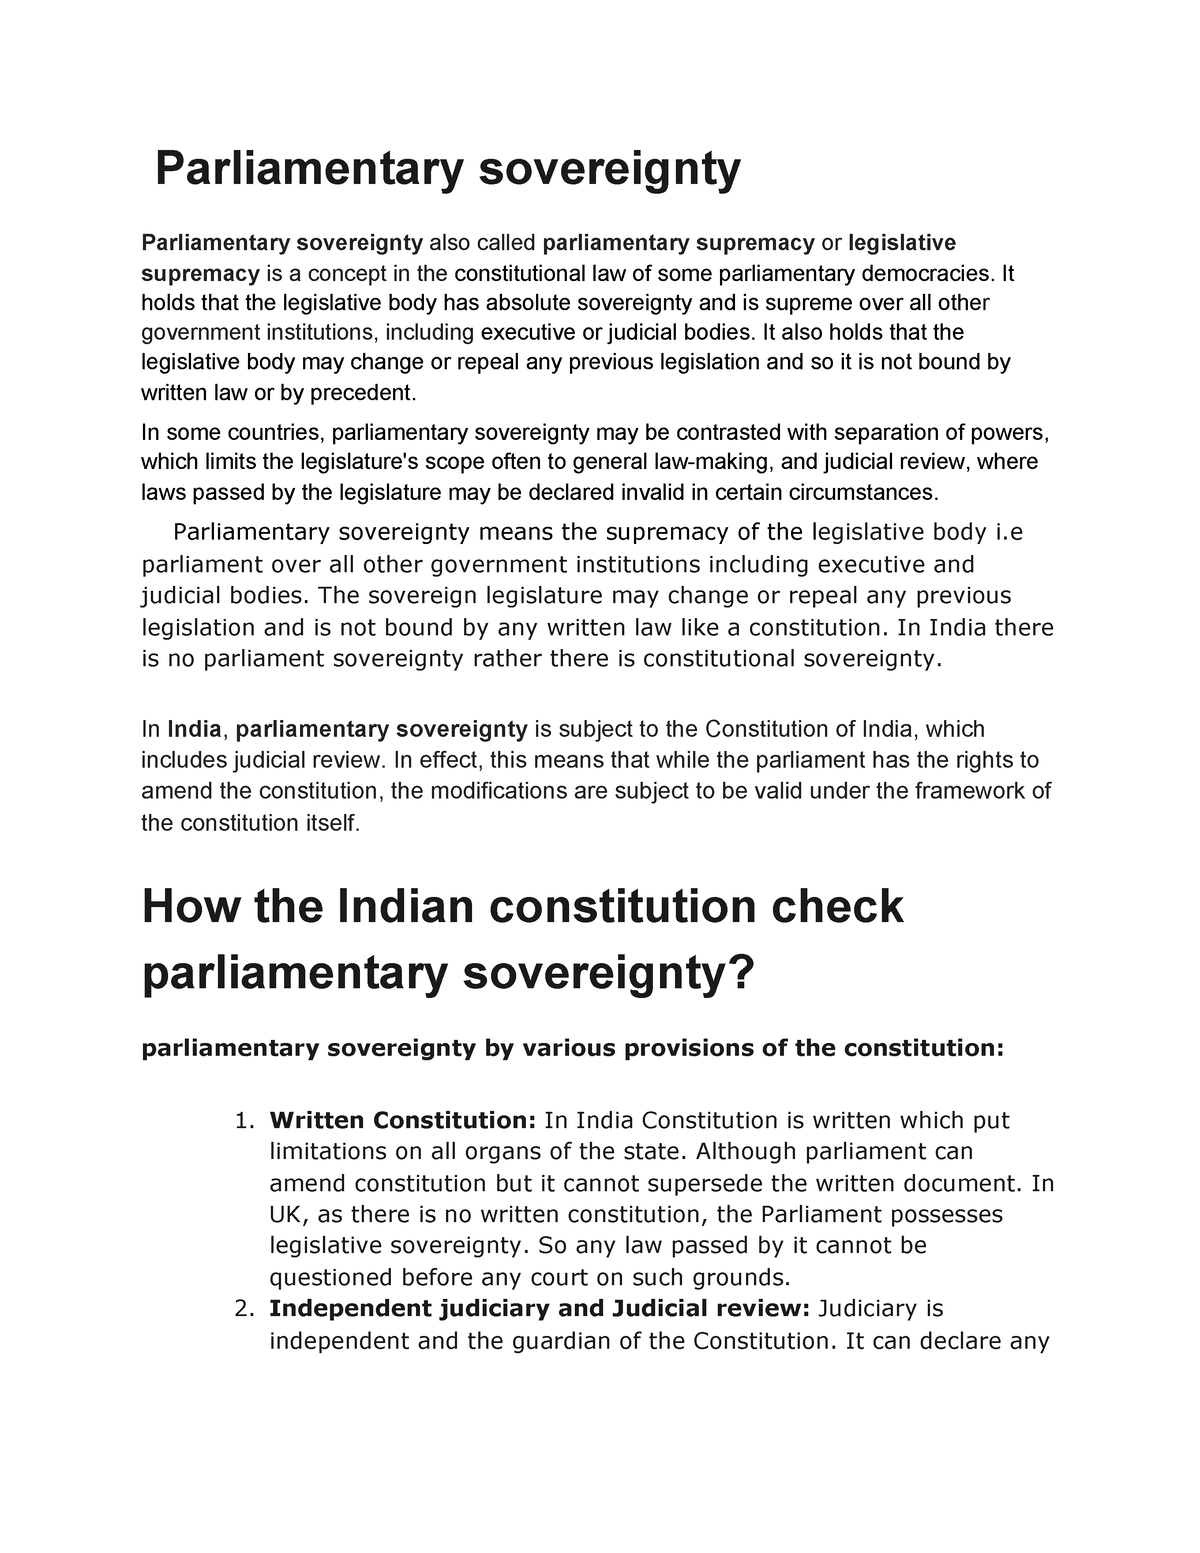 rule of law and parliamentary sovereignty essay